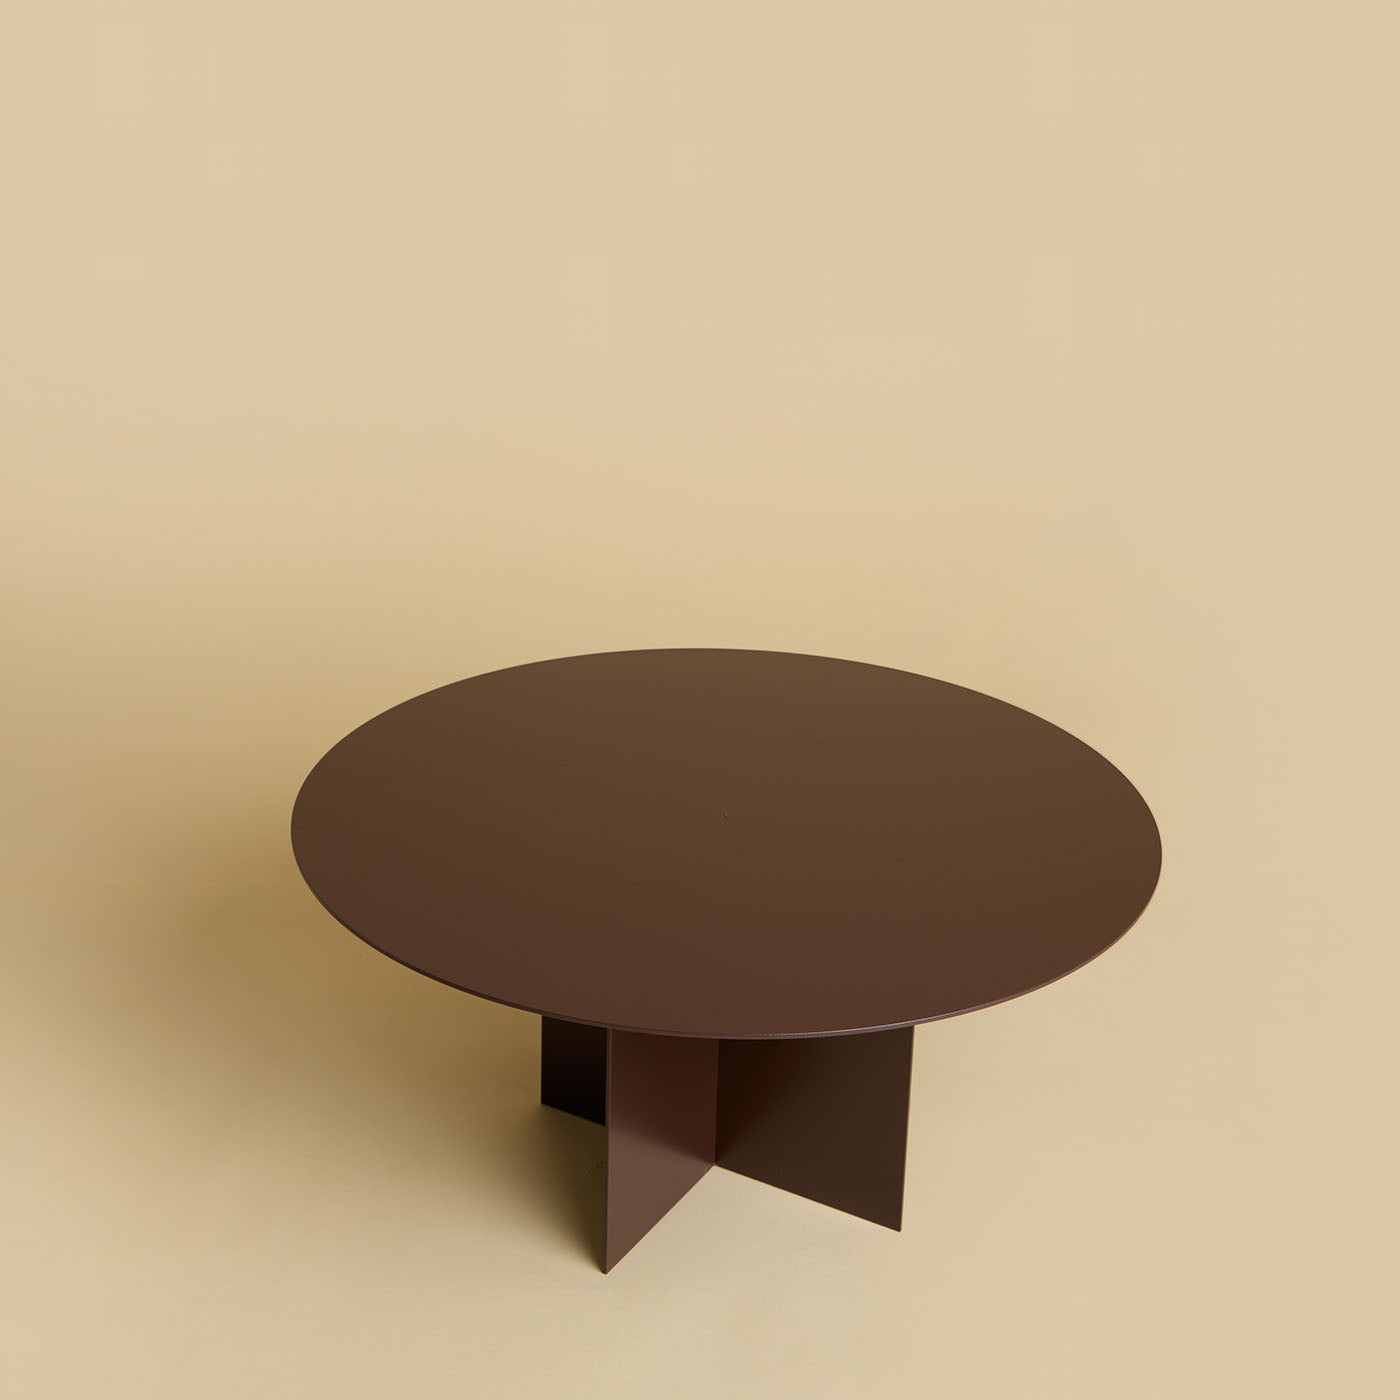 Fire Chocolate Brown Coffee Table - Alternative view 2